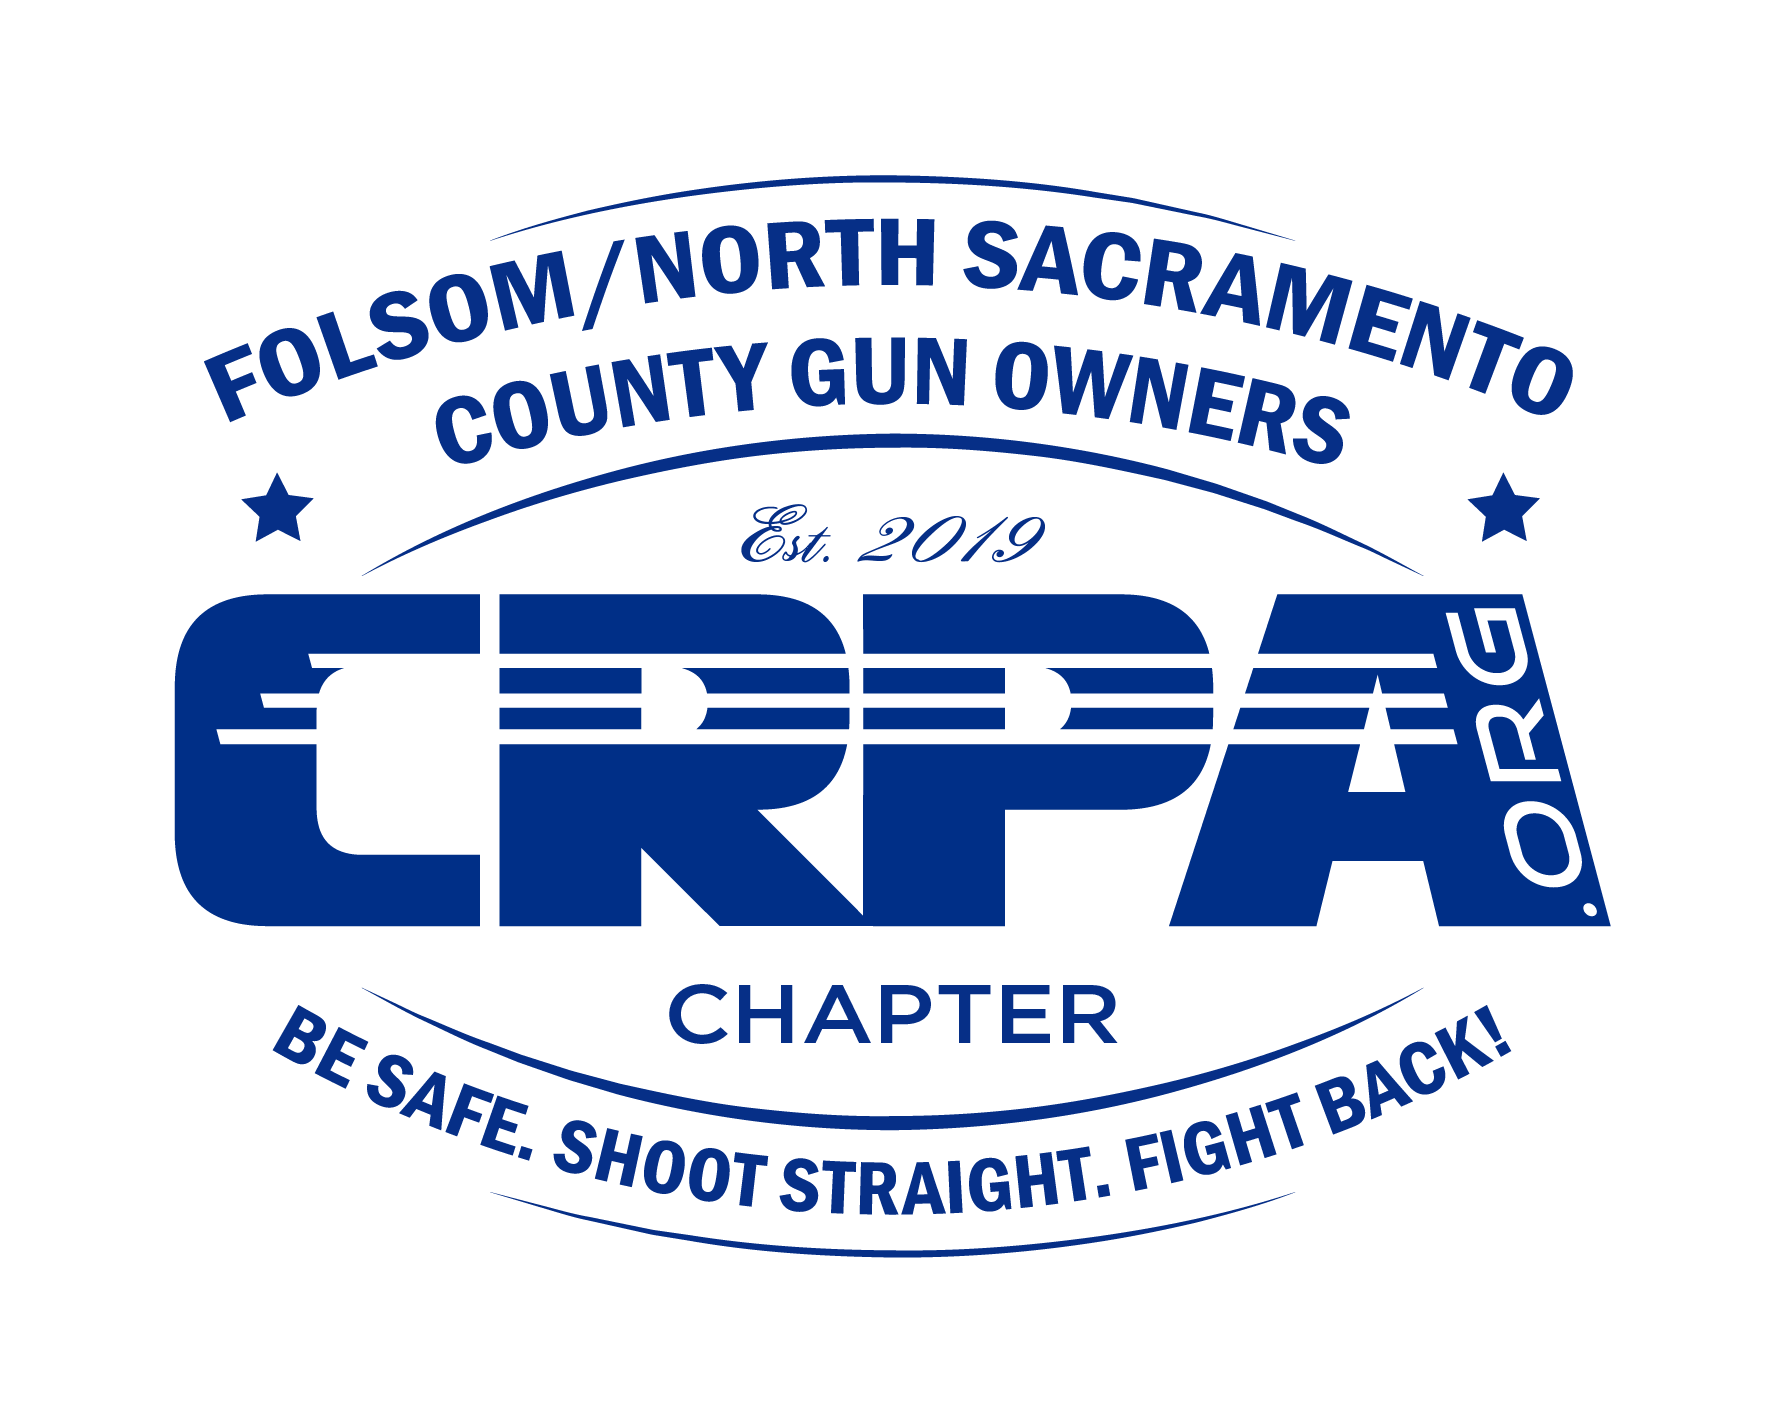 Folsom/North Sacramento County Gun Owners: A CRPA Chapter